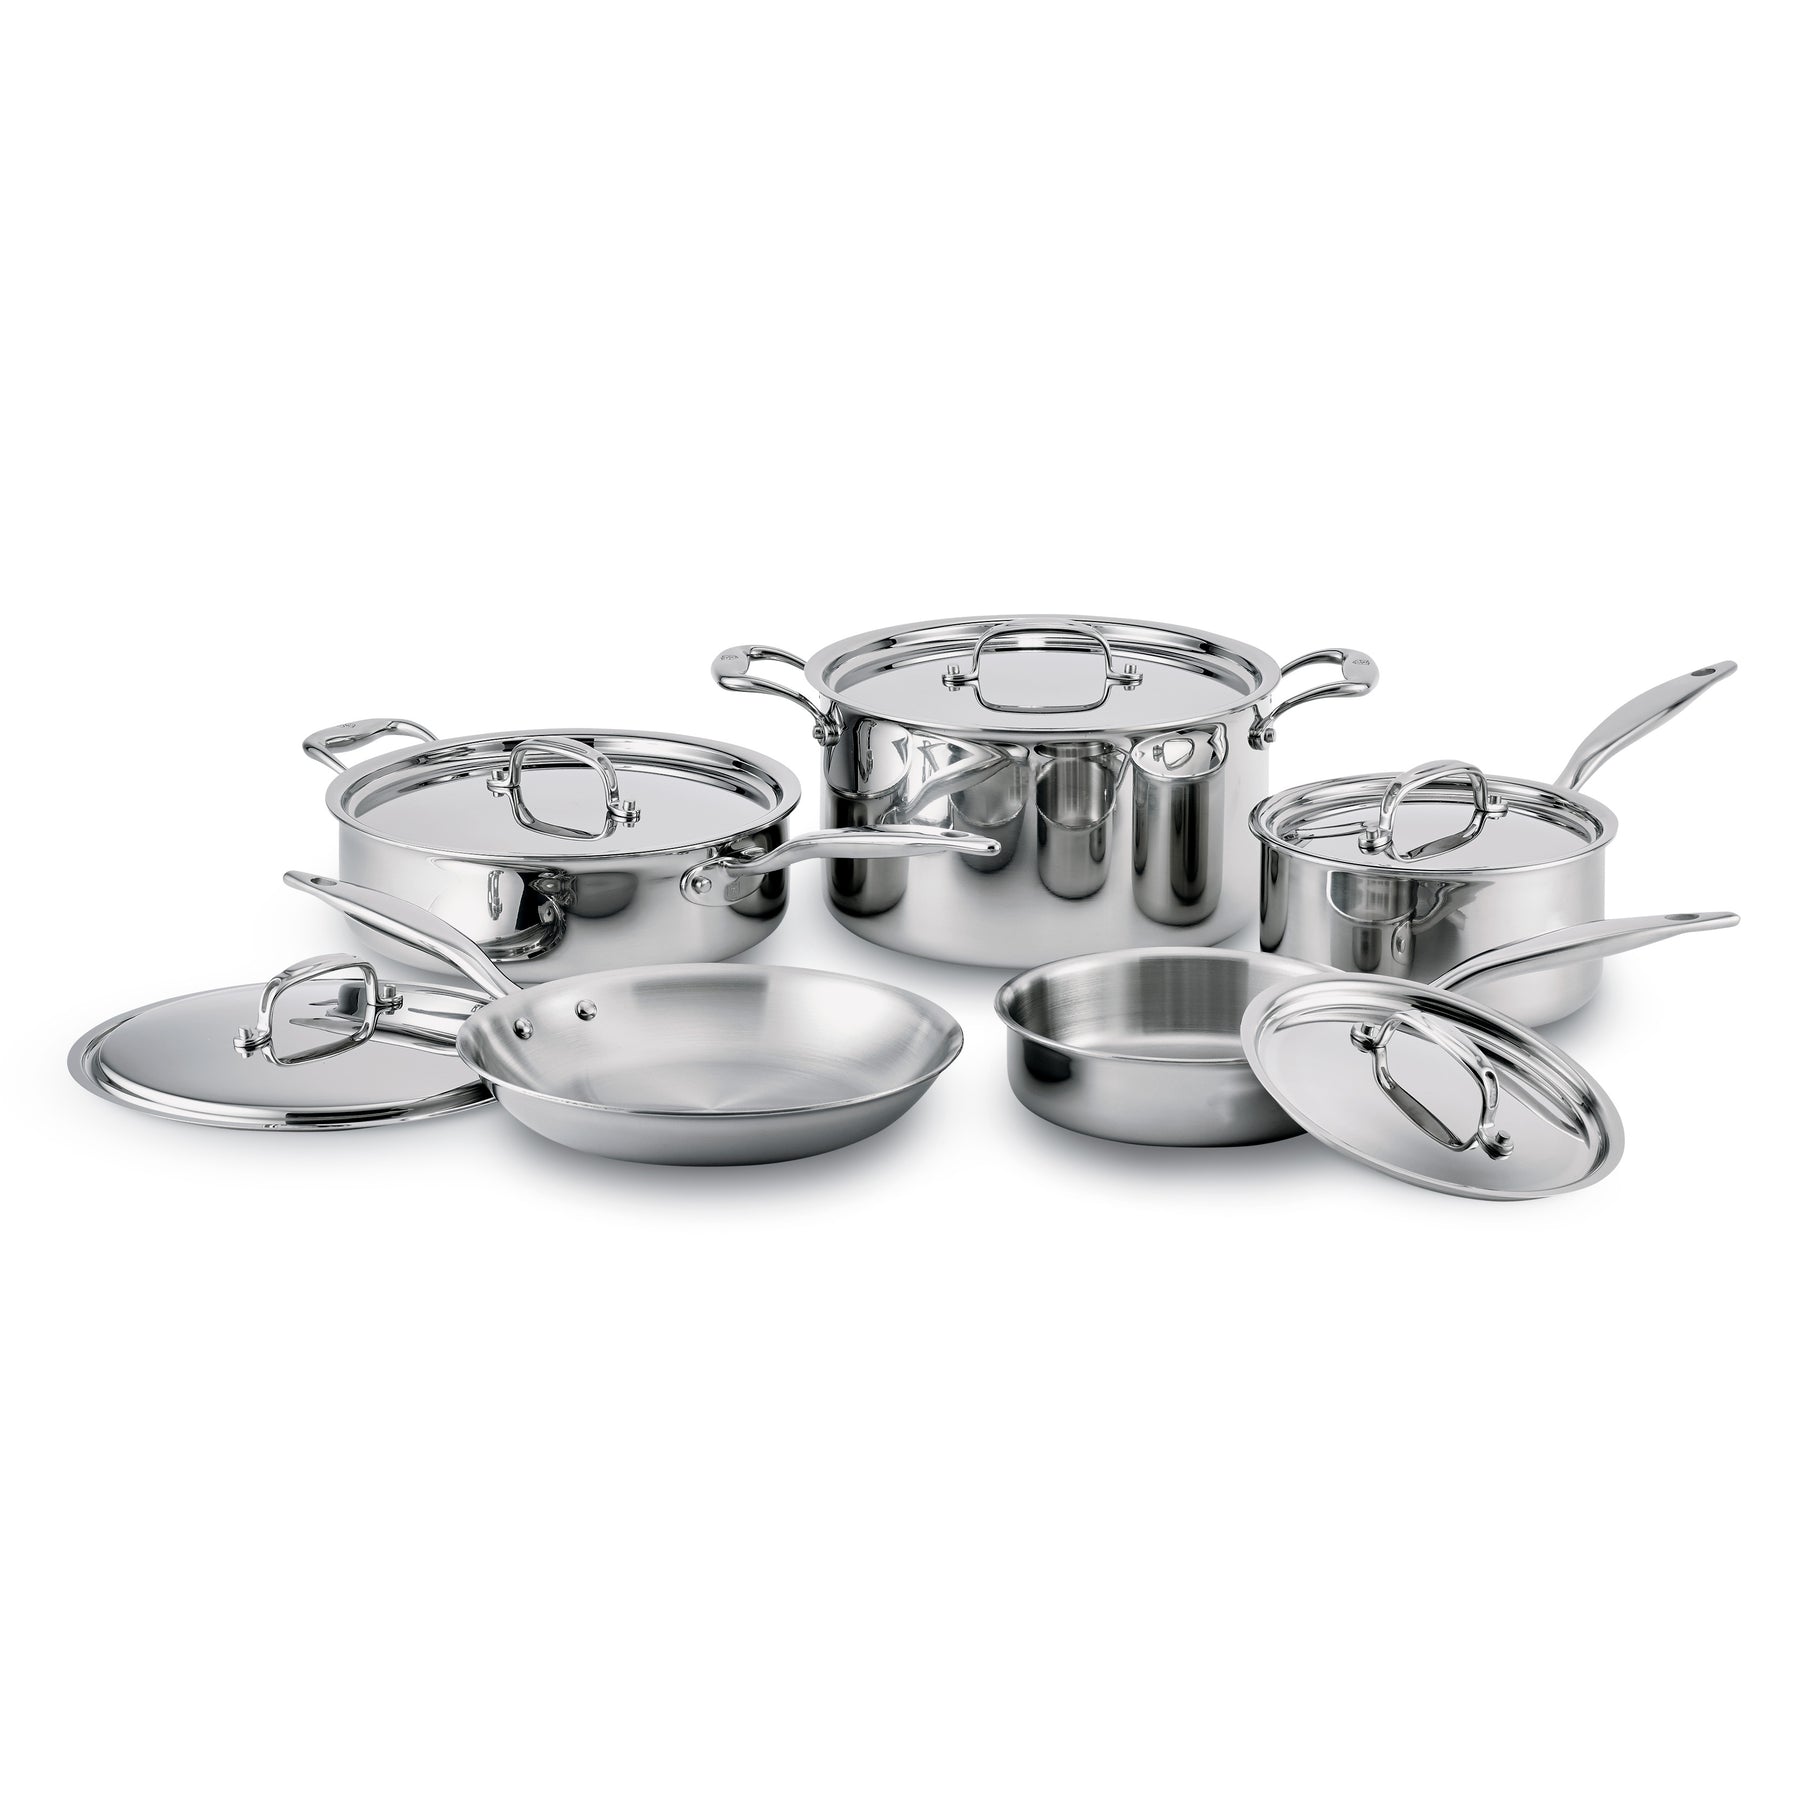 12'' x 10'' Stainless Steel Pans Available in 2 1/2'' x 4'' Depth. Ple –  Rainhart